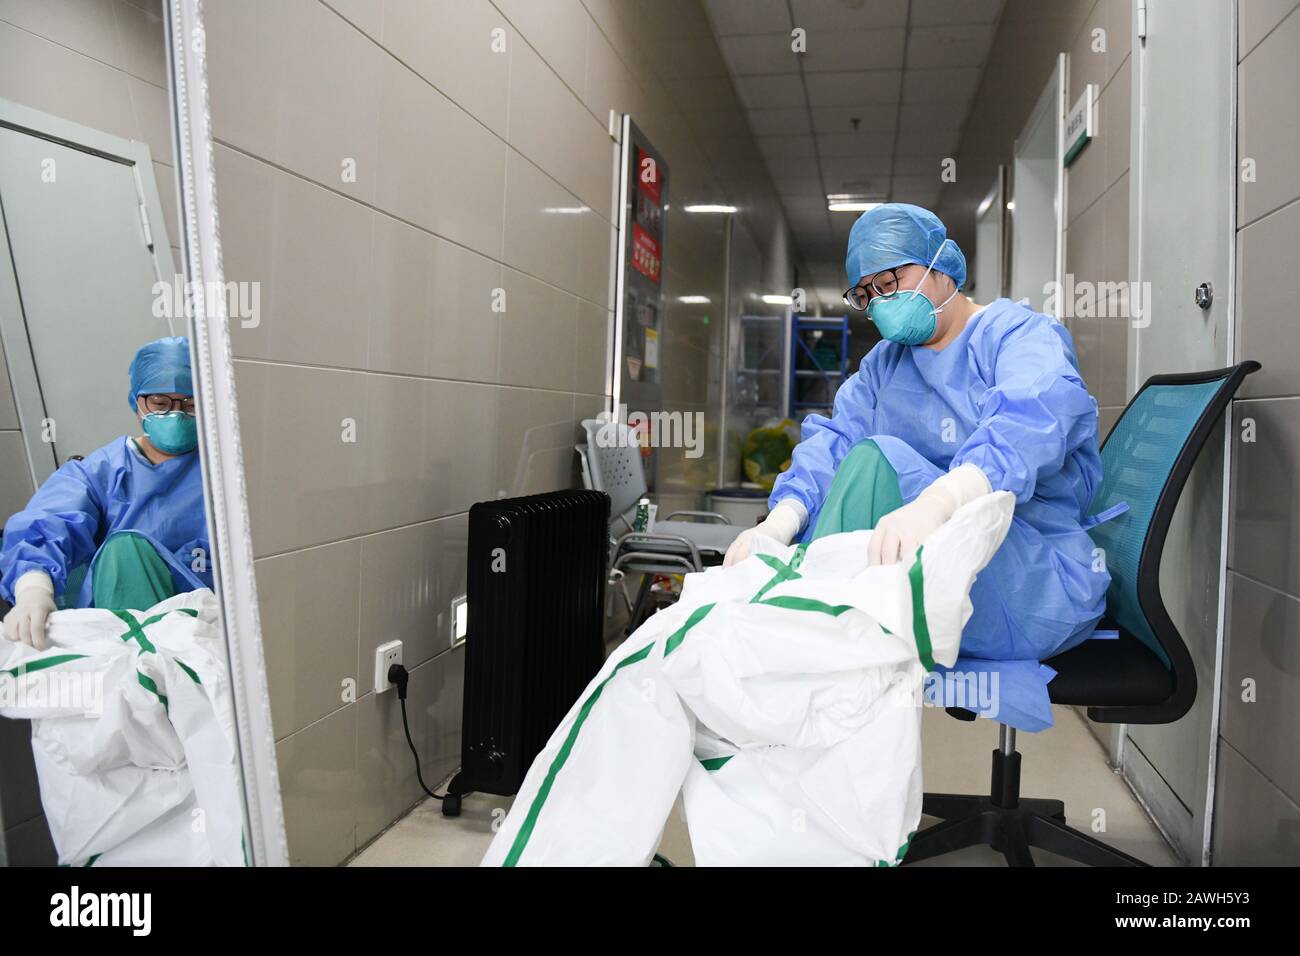 (200209) -- HEFEI, Feb. 9, 2020 (Xinhua) -- Fang Ji puts on a protective suit before entering the isolation ward in the Second People's Hospital of Hefei in Hefei, capital of east China's Anhui Province, Feb. 6, 2020. Fang Ji, 34, is a nurse who works in the ICU (intensive care unit) of the Second People's Hospital of Hefei. After the outbreak of the novel coronavirus (2019-nCov), Fang and her colleagues stay 24 hours a day in the hospital taking care of patients in shifts. The balcony of Fang's house lies in front of the hospital. In order to comfort two little sons who miss her badly at home Stock Photo